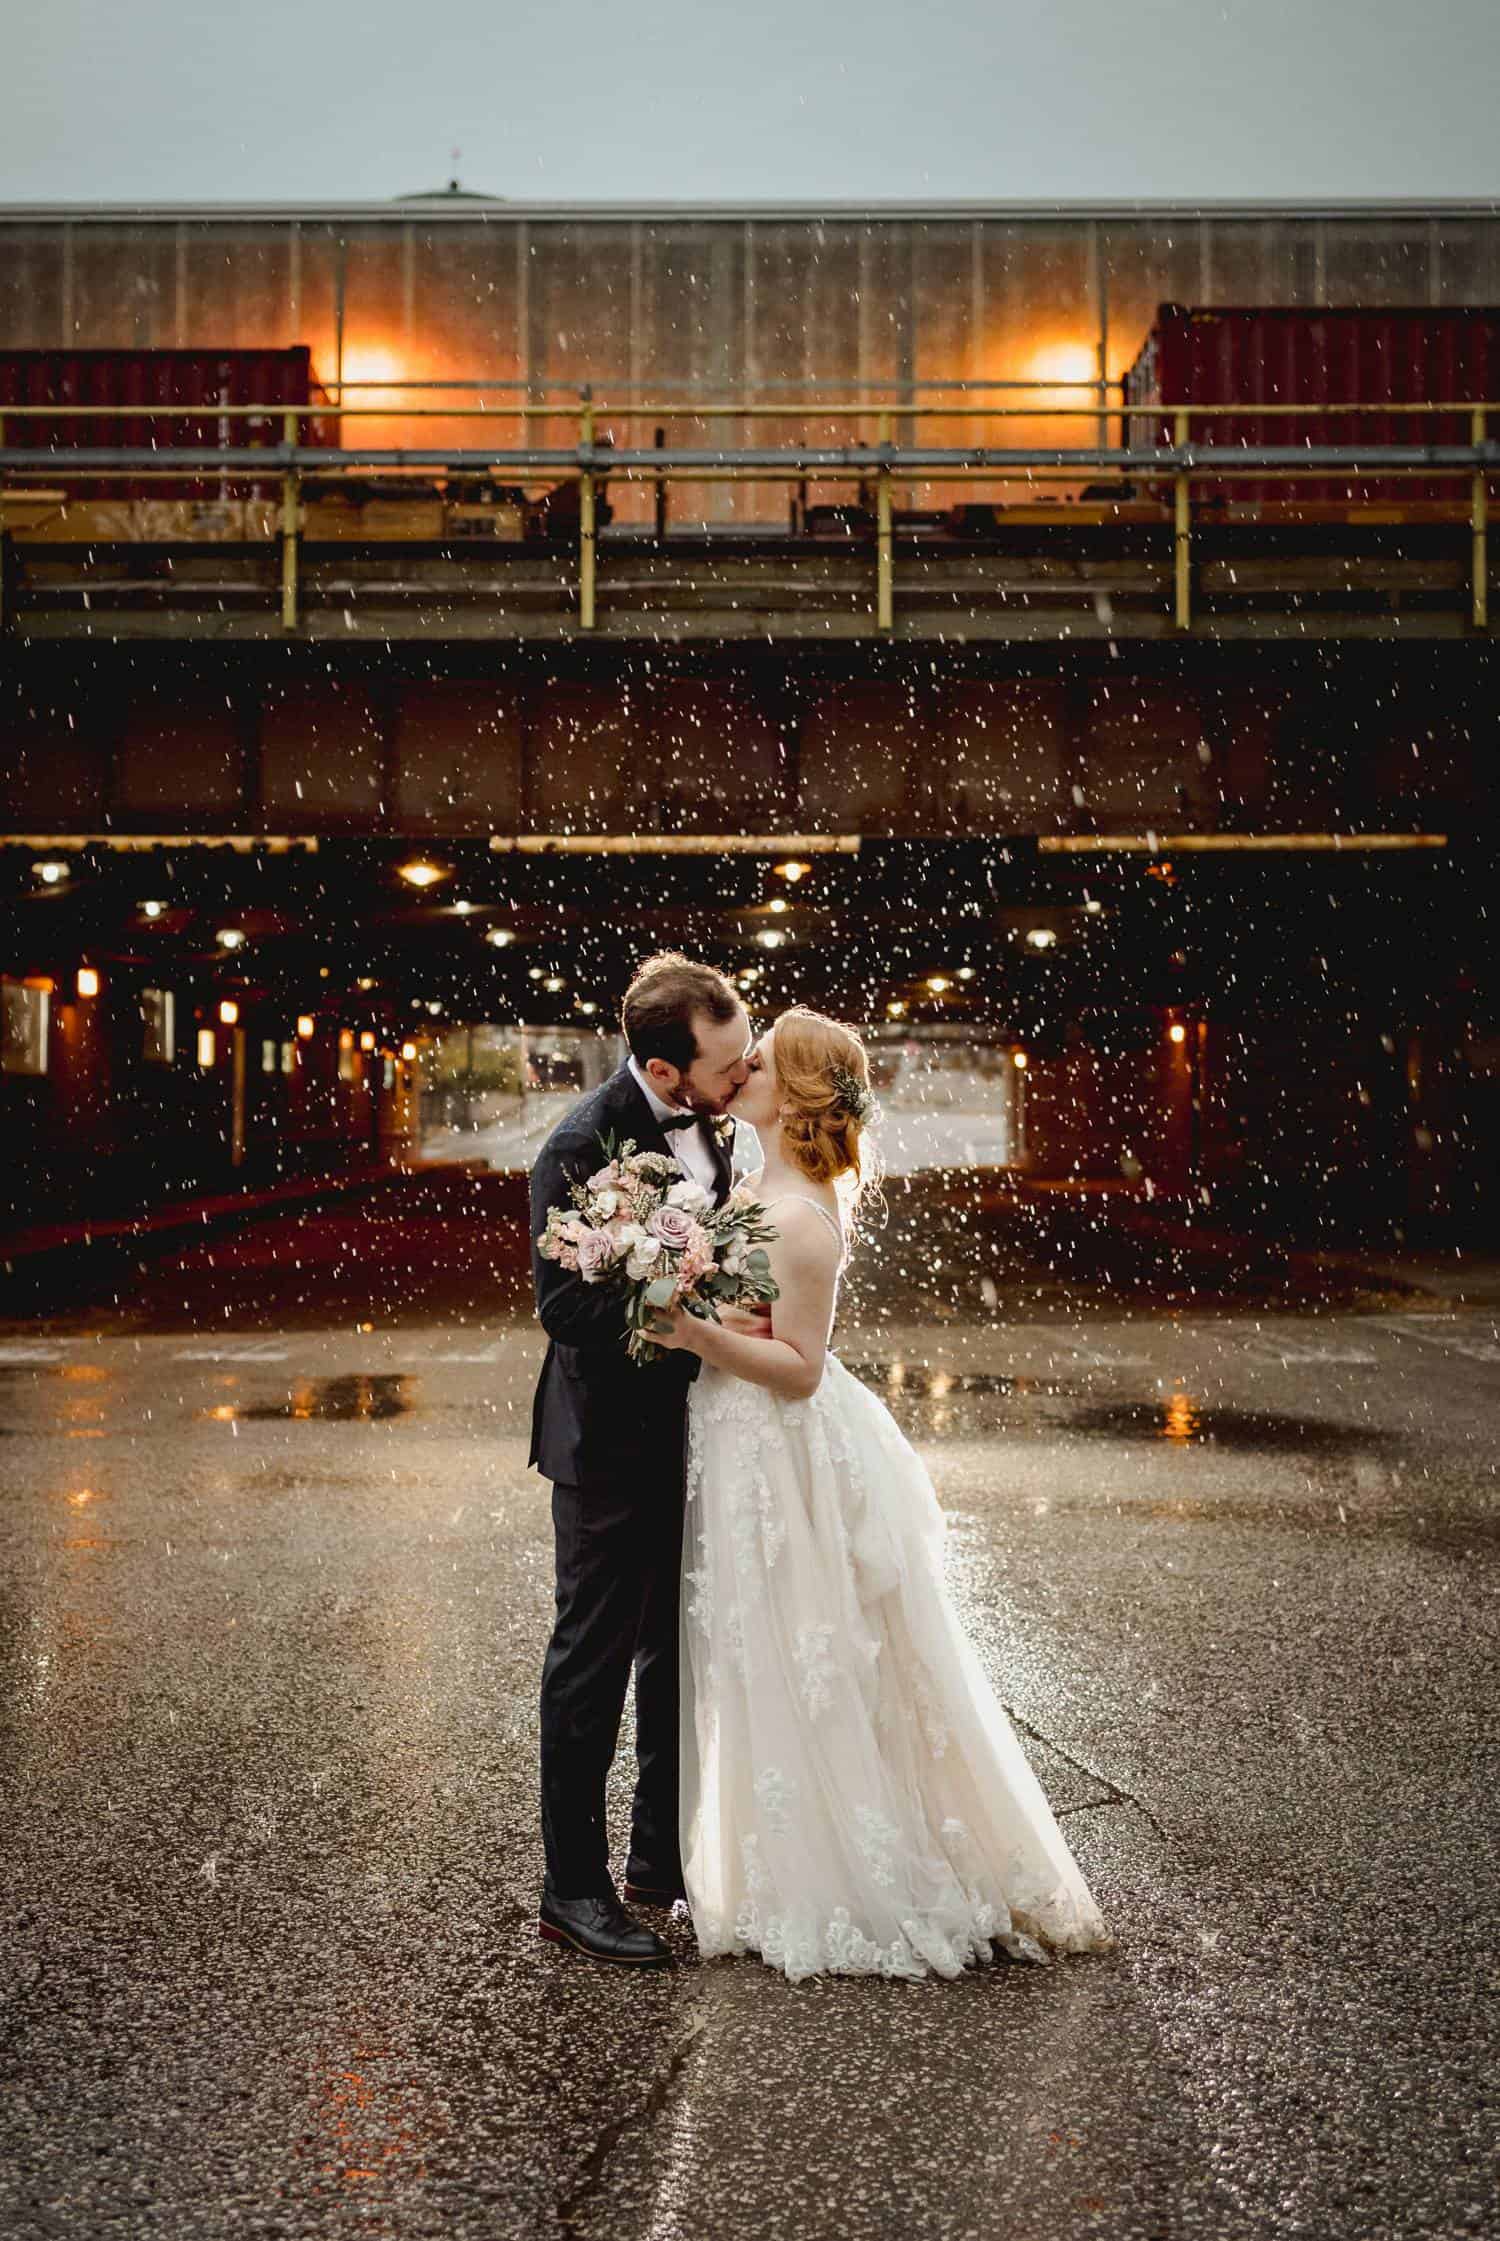 A bride and groom stand kissing in the middle of the road. A train trestle looms behind them, and rain pours all around them. Black & Gold Photography uses this photograph to teach photographers how to make wedding portraits using off-camera flash.